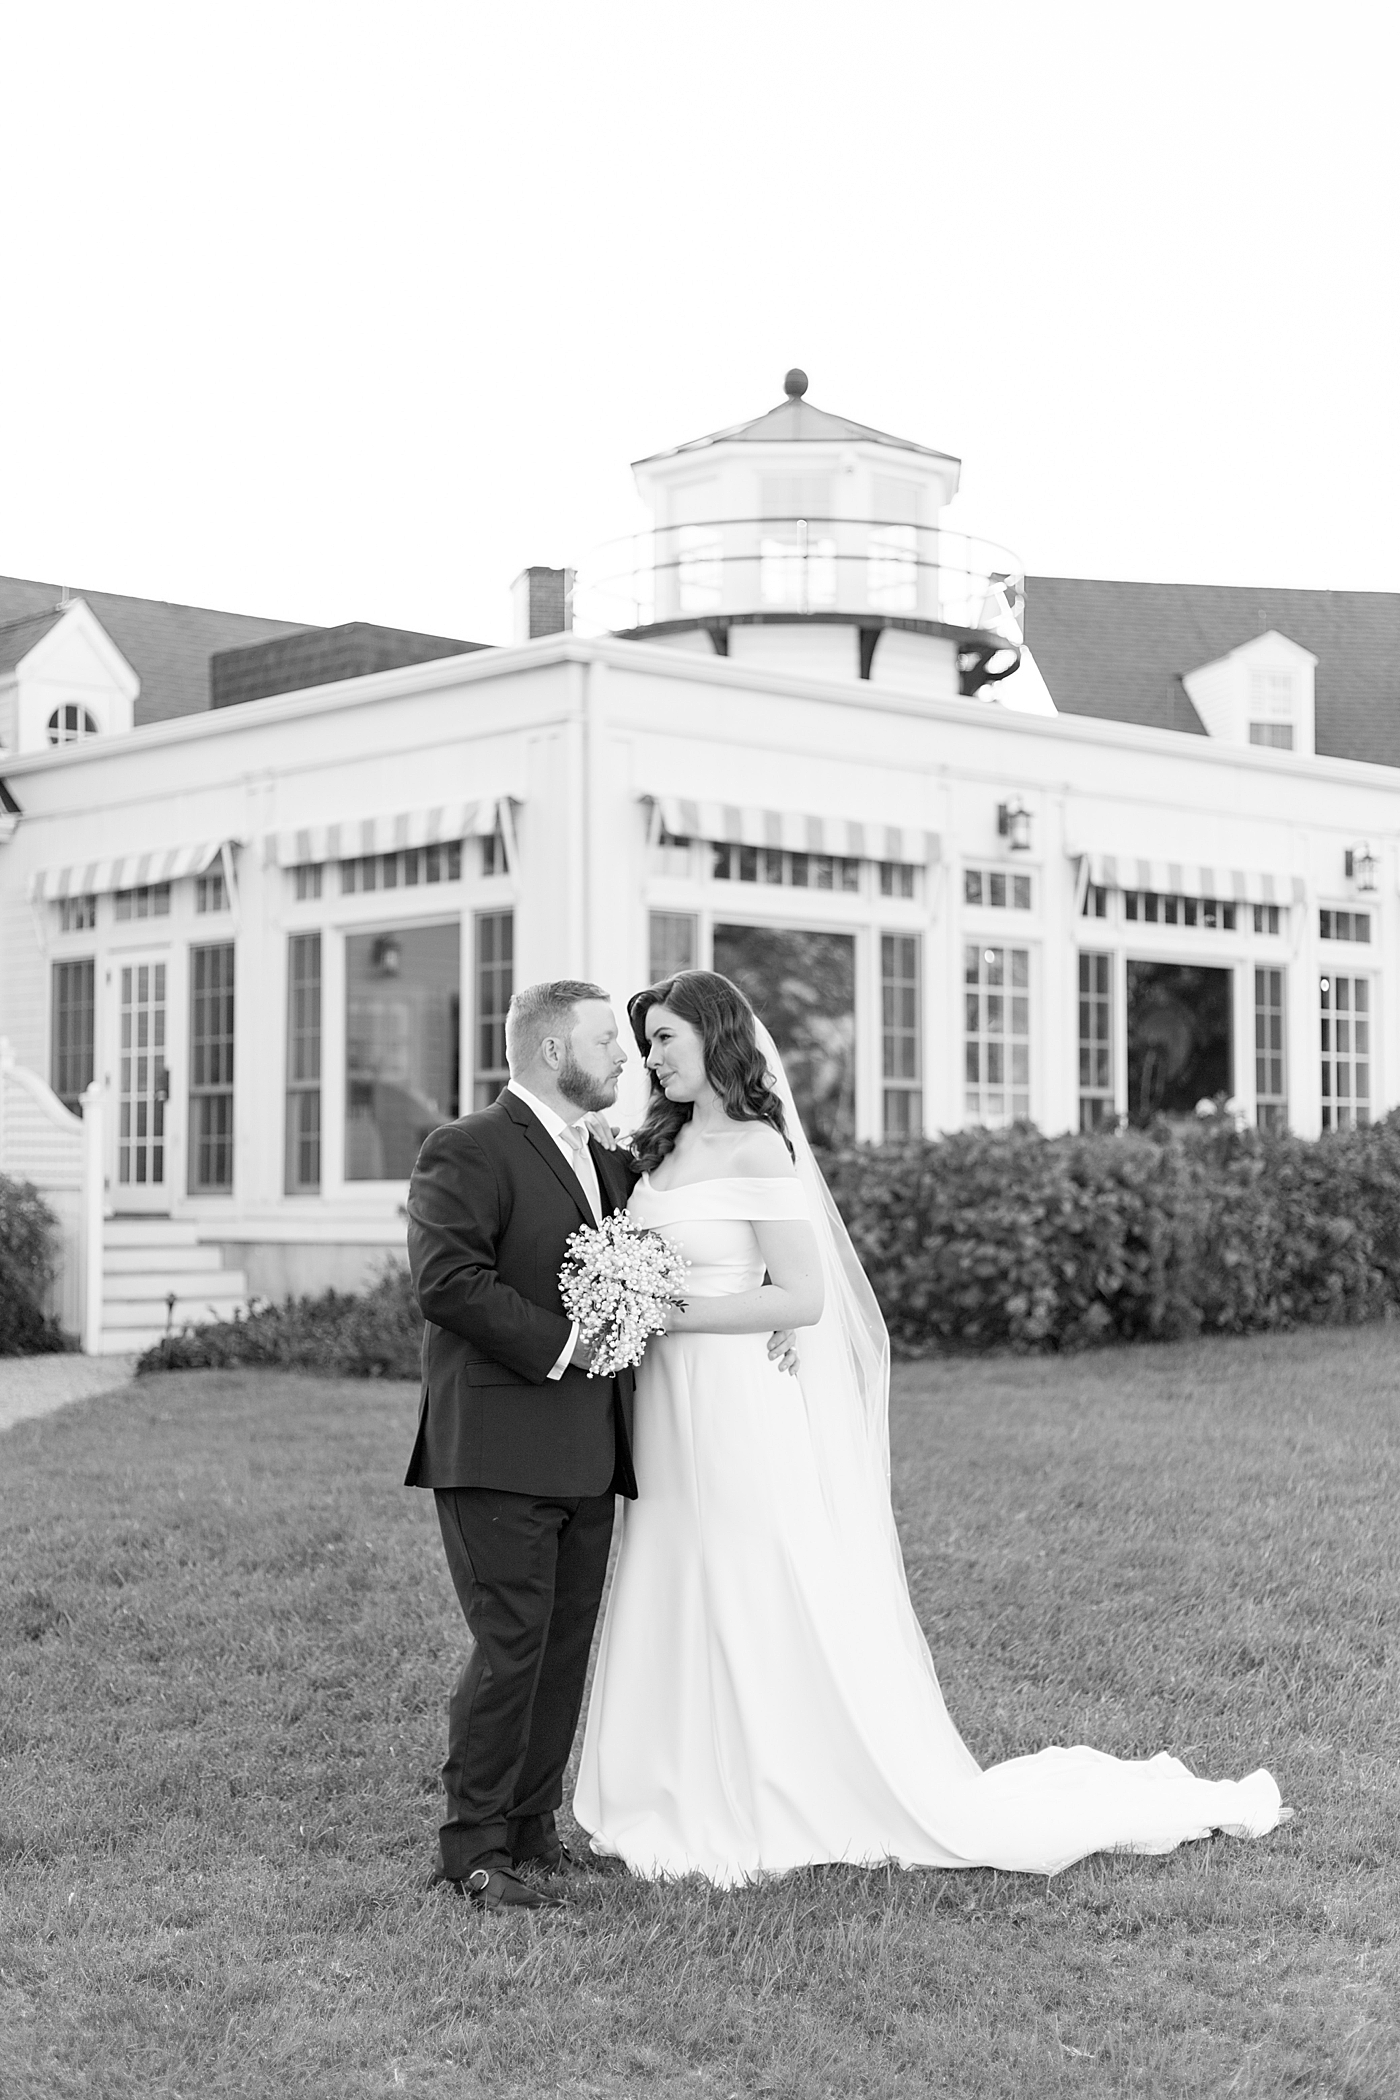 Black and white image of bride and groom on a lawn | Photo by Hope Helmuth Photography